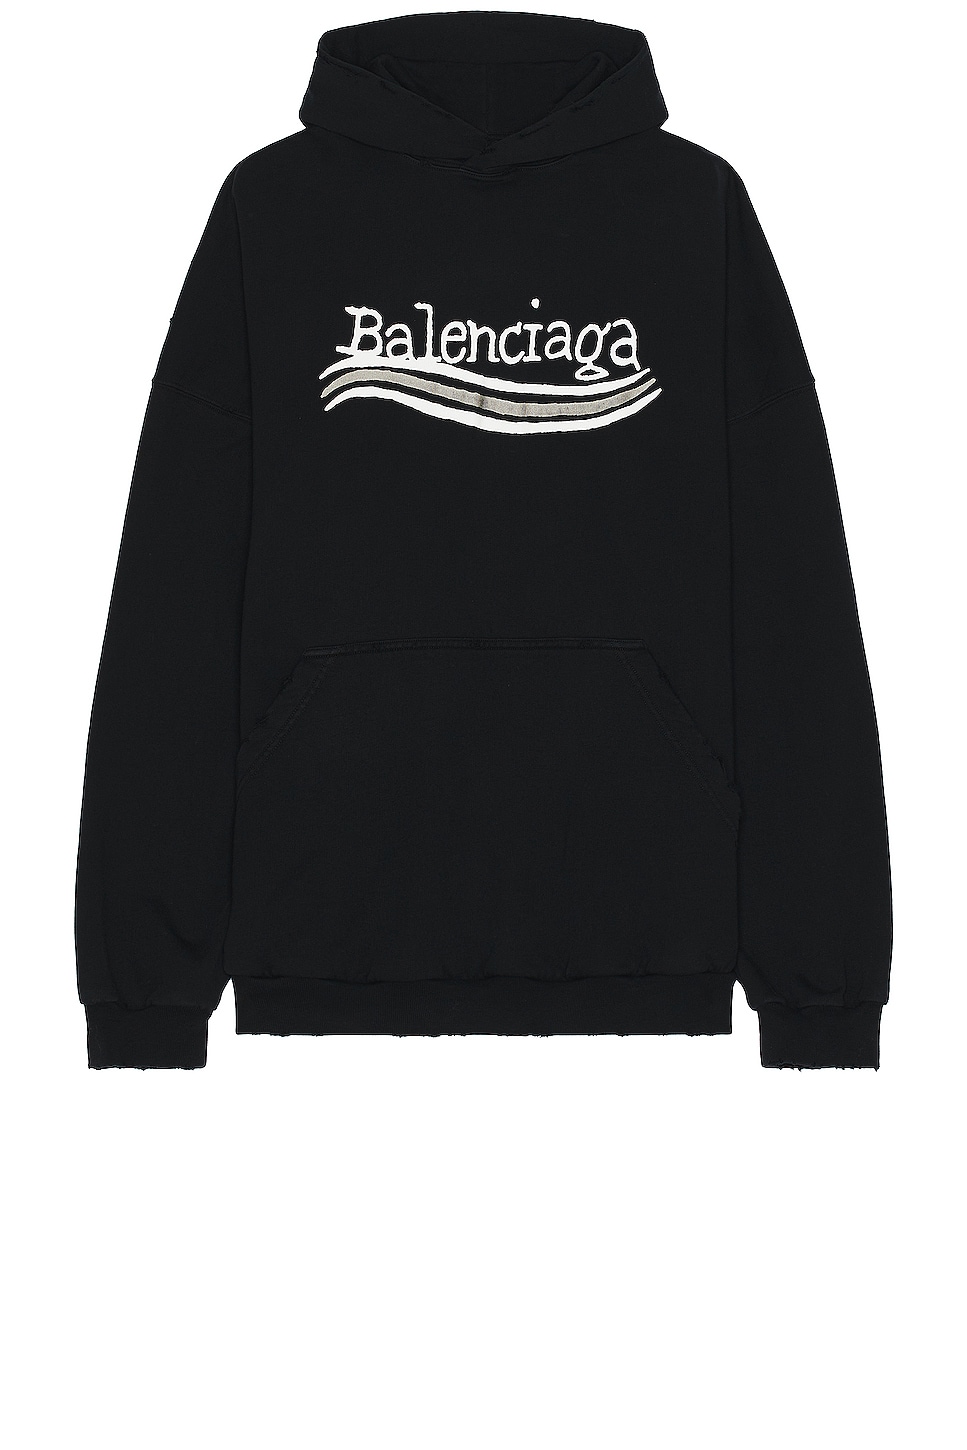 Image 1 of Balenciaga Large Fit Hoodie in Black, Silver, & White